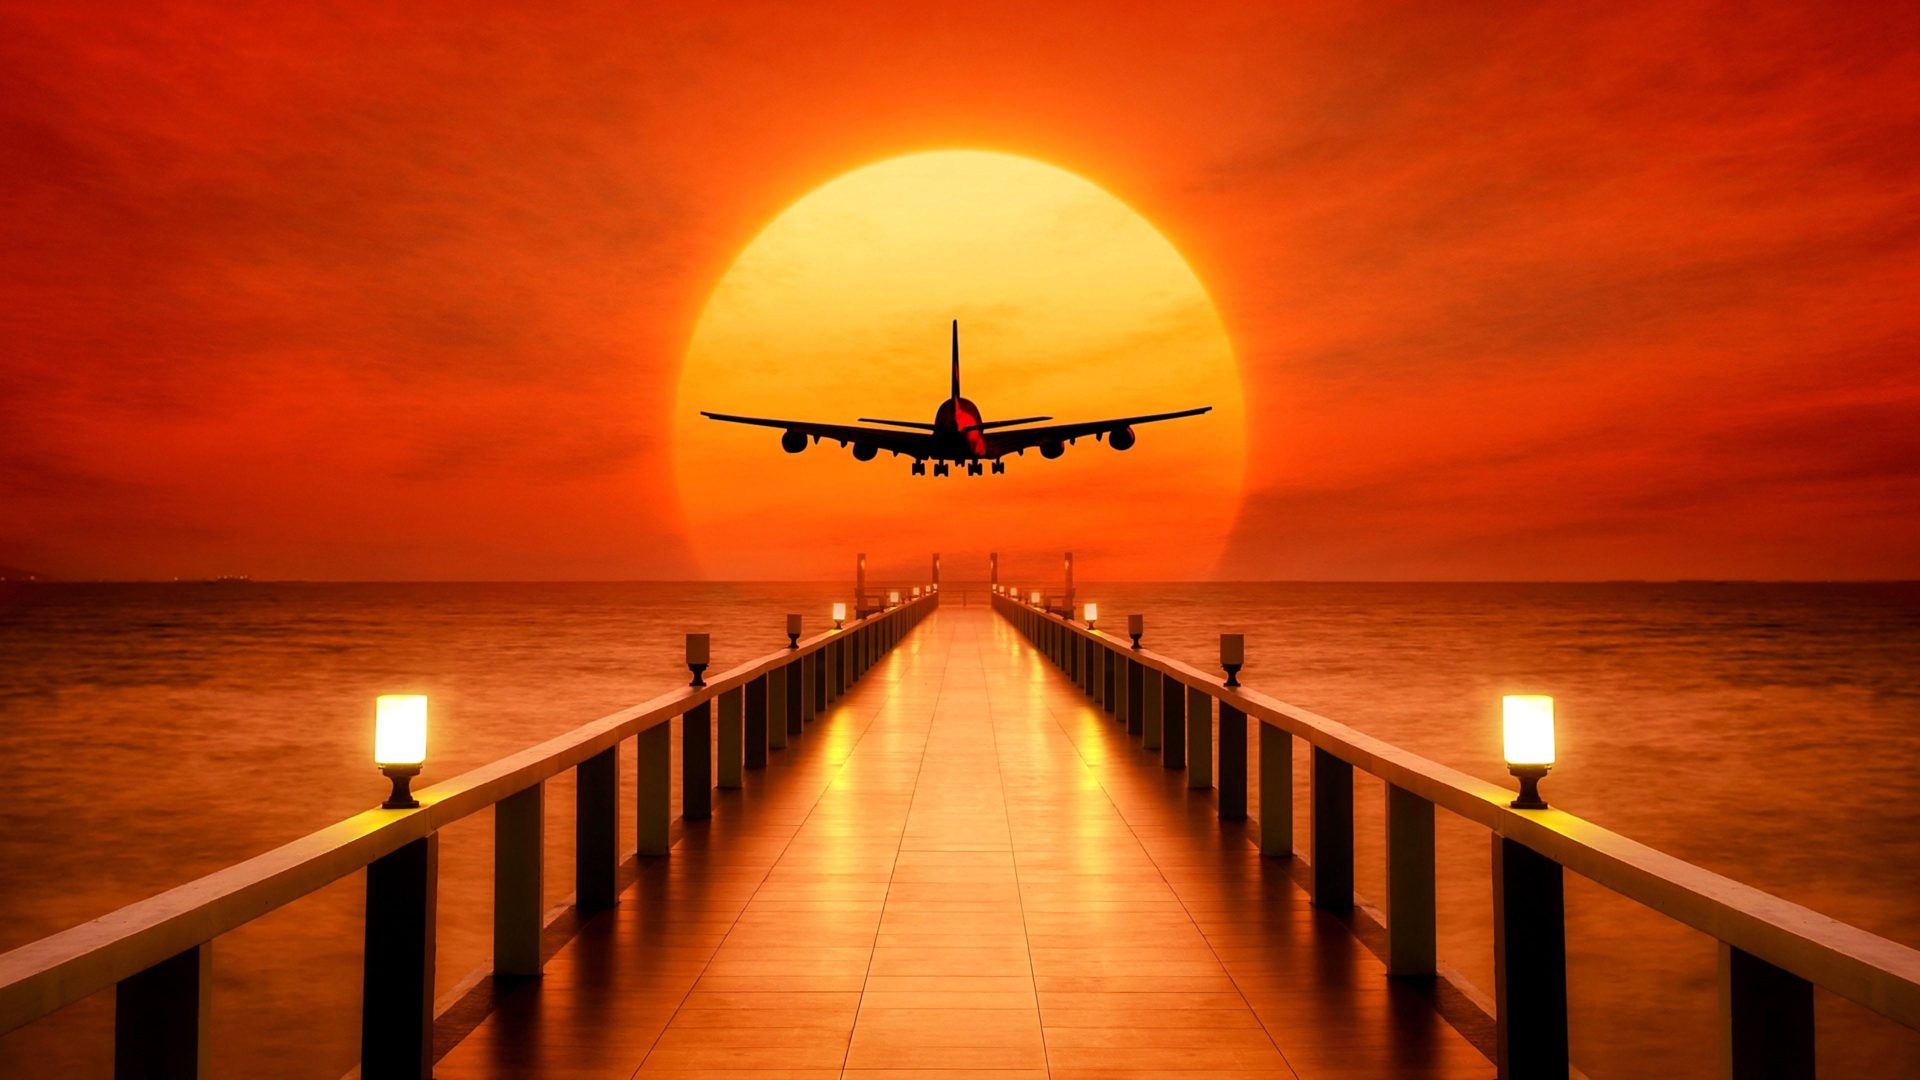 Sunset Airplane Takeoff Free Image For Wallpaper HD